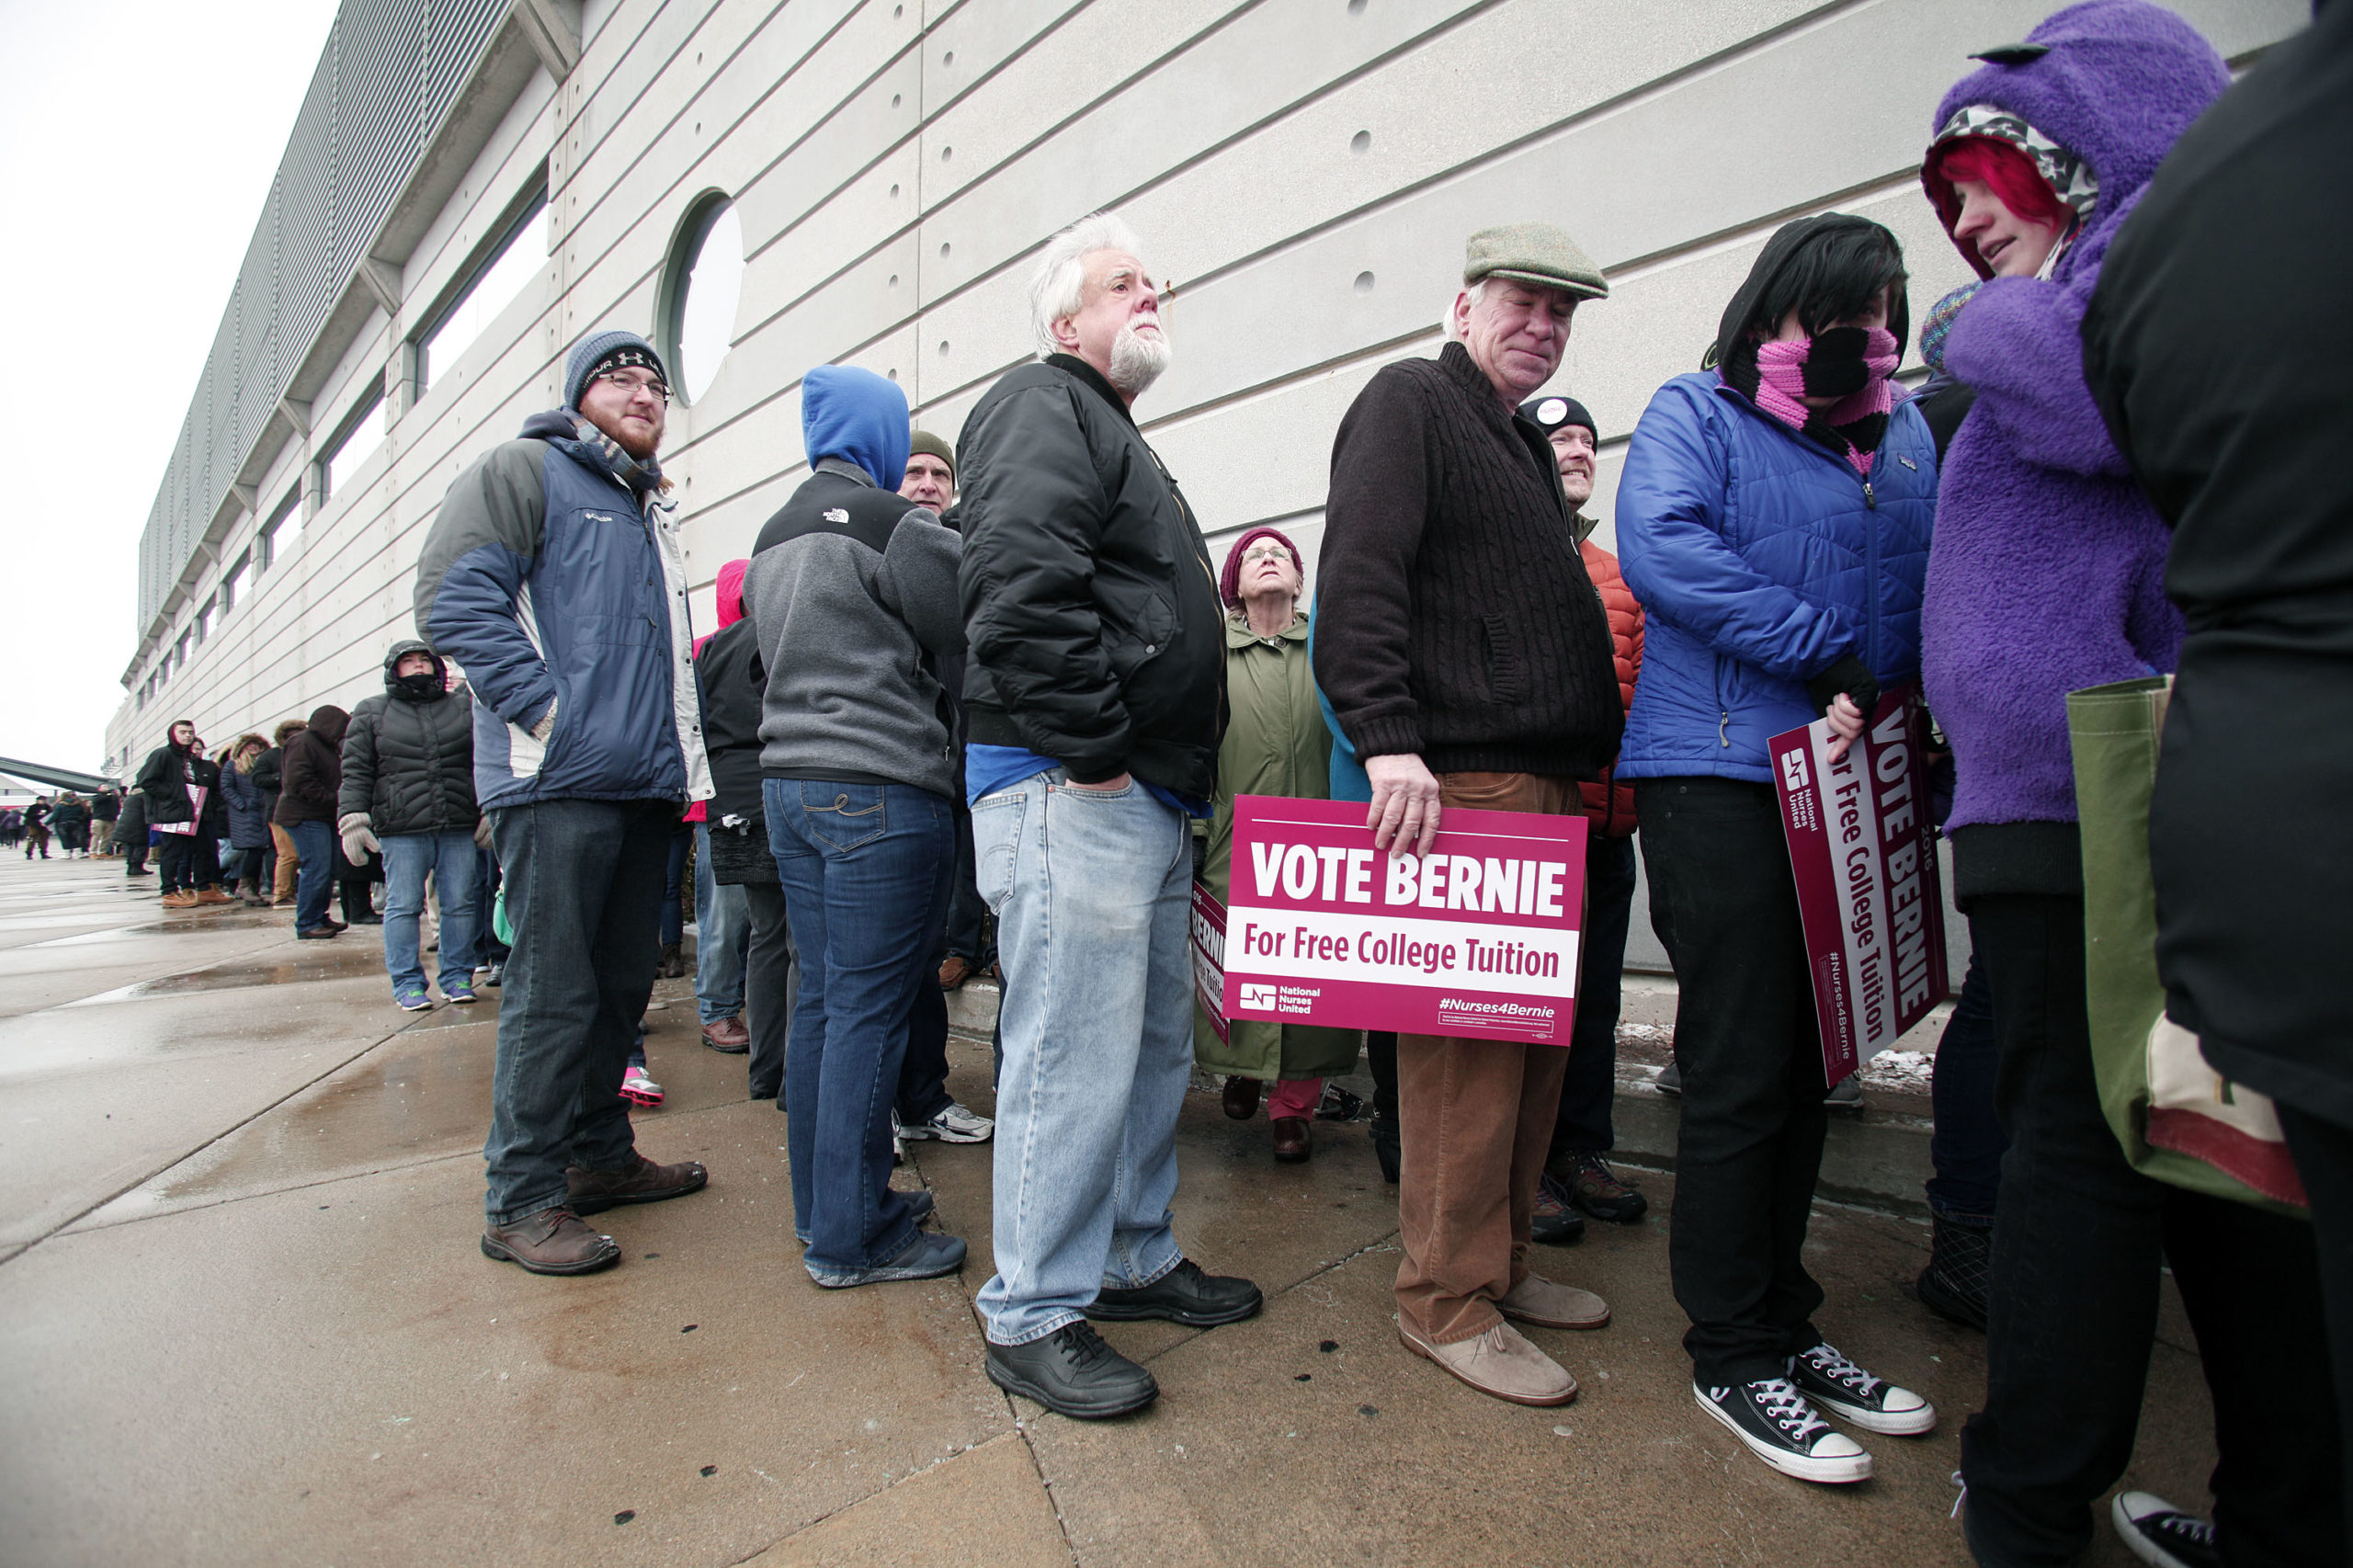 People wait in line in the cold to get into U.S. Senator and Democratic Presidential Candidate Bernie Sanders first campaign rally in Michigan at Eastern Michigan University February 15, 2016 in Ypsilanti, Michigan. Sanders is expected to speak on a wide range of issues, including his plans to make public colleges and universities tuition-free. The next voting for the democratic candidates will be the Democratic caucus in Nevada on February 20. (Photo by Bill Pugliano/Getty Images)